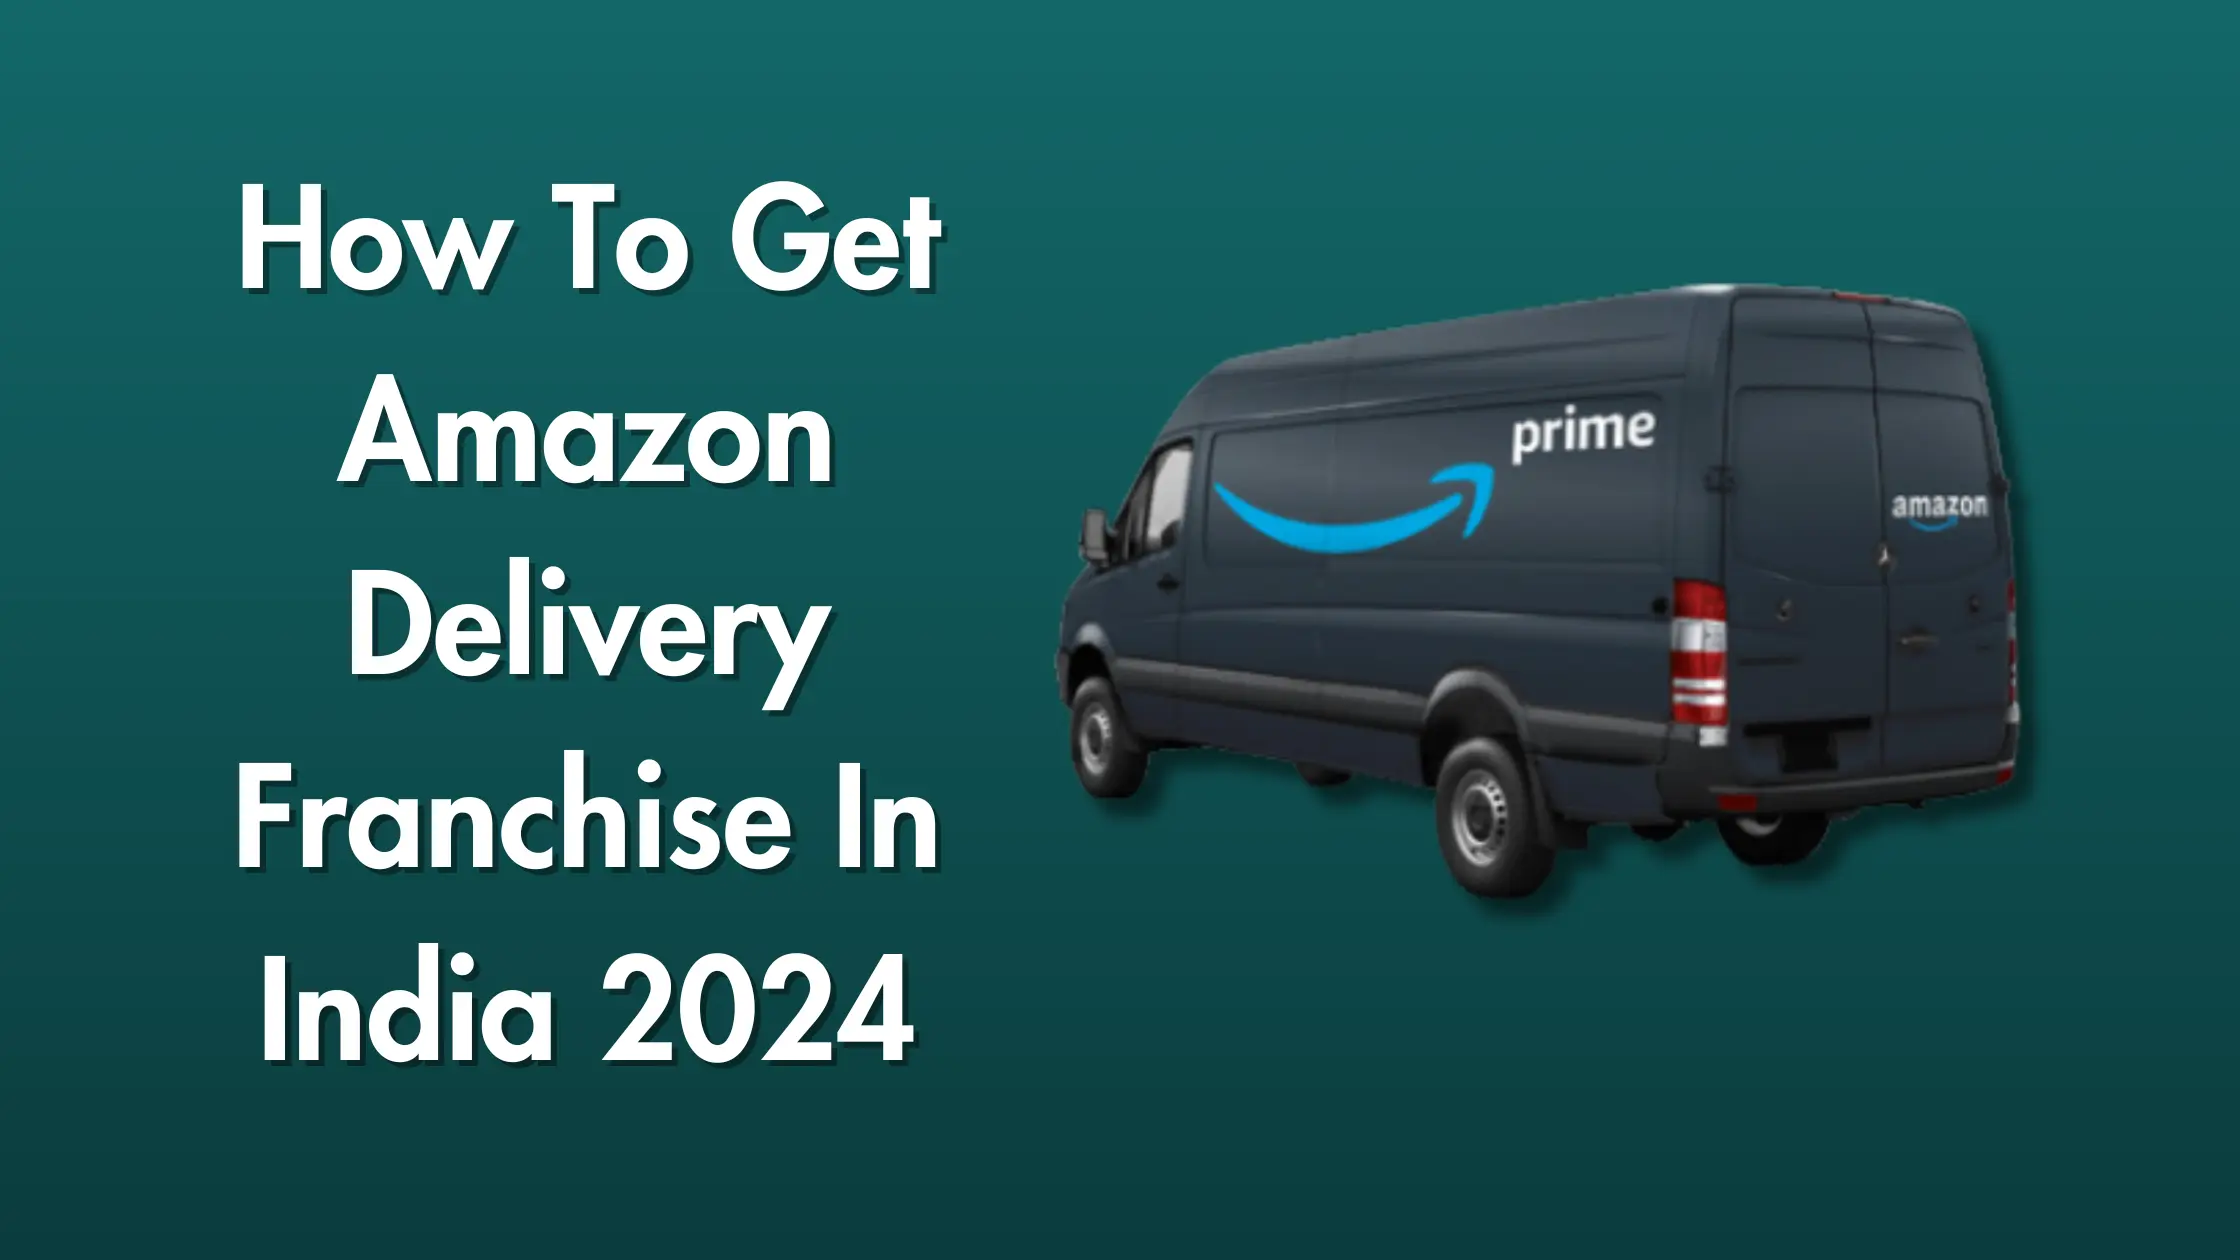 How To Get Amazon Delivery Franchise In India 2024